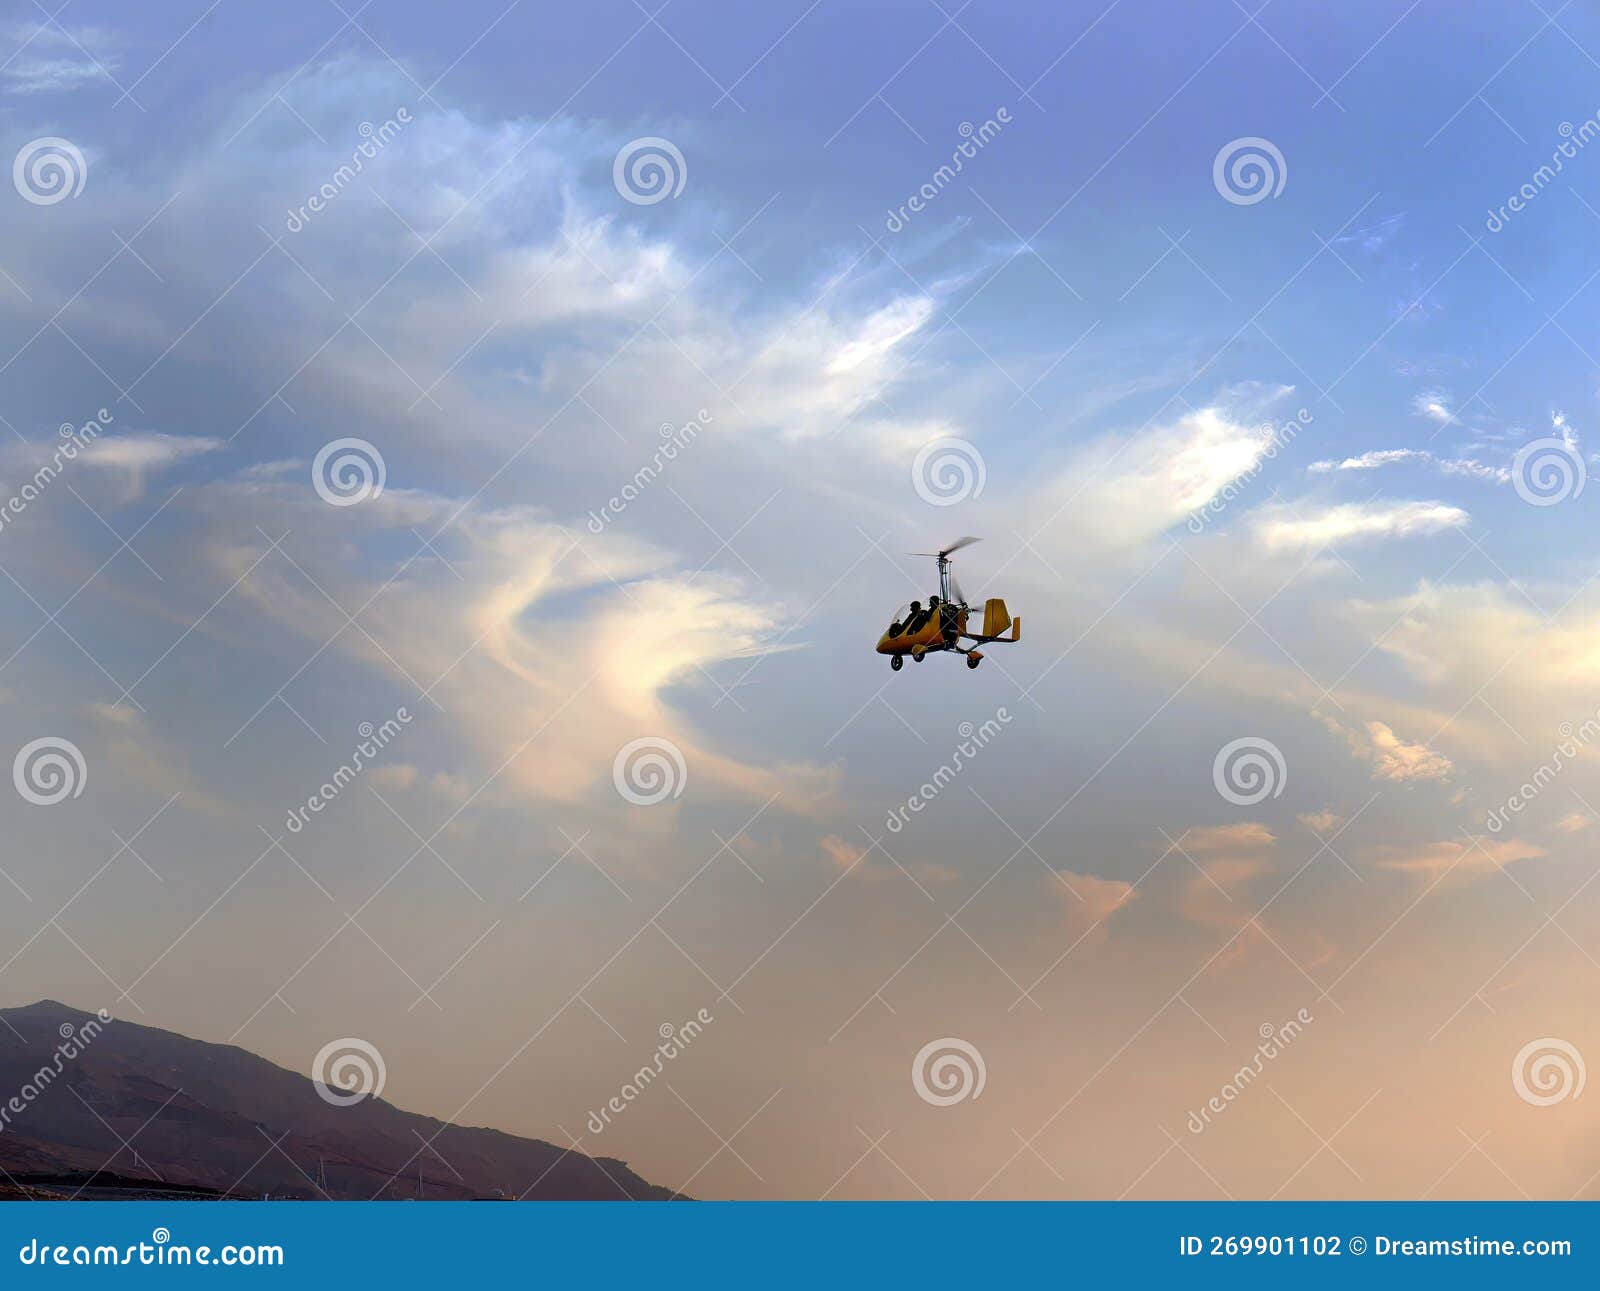 low angle view of yellow color gyrocopter flying in the blue sky and dramatic clouds, fun fly, aero sports, skydive, roto craft,